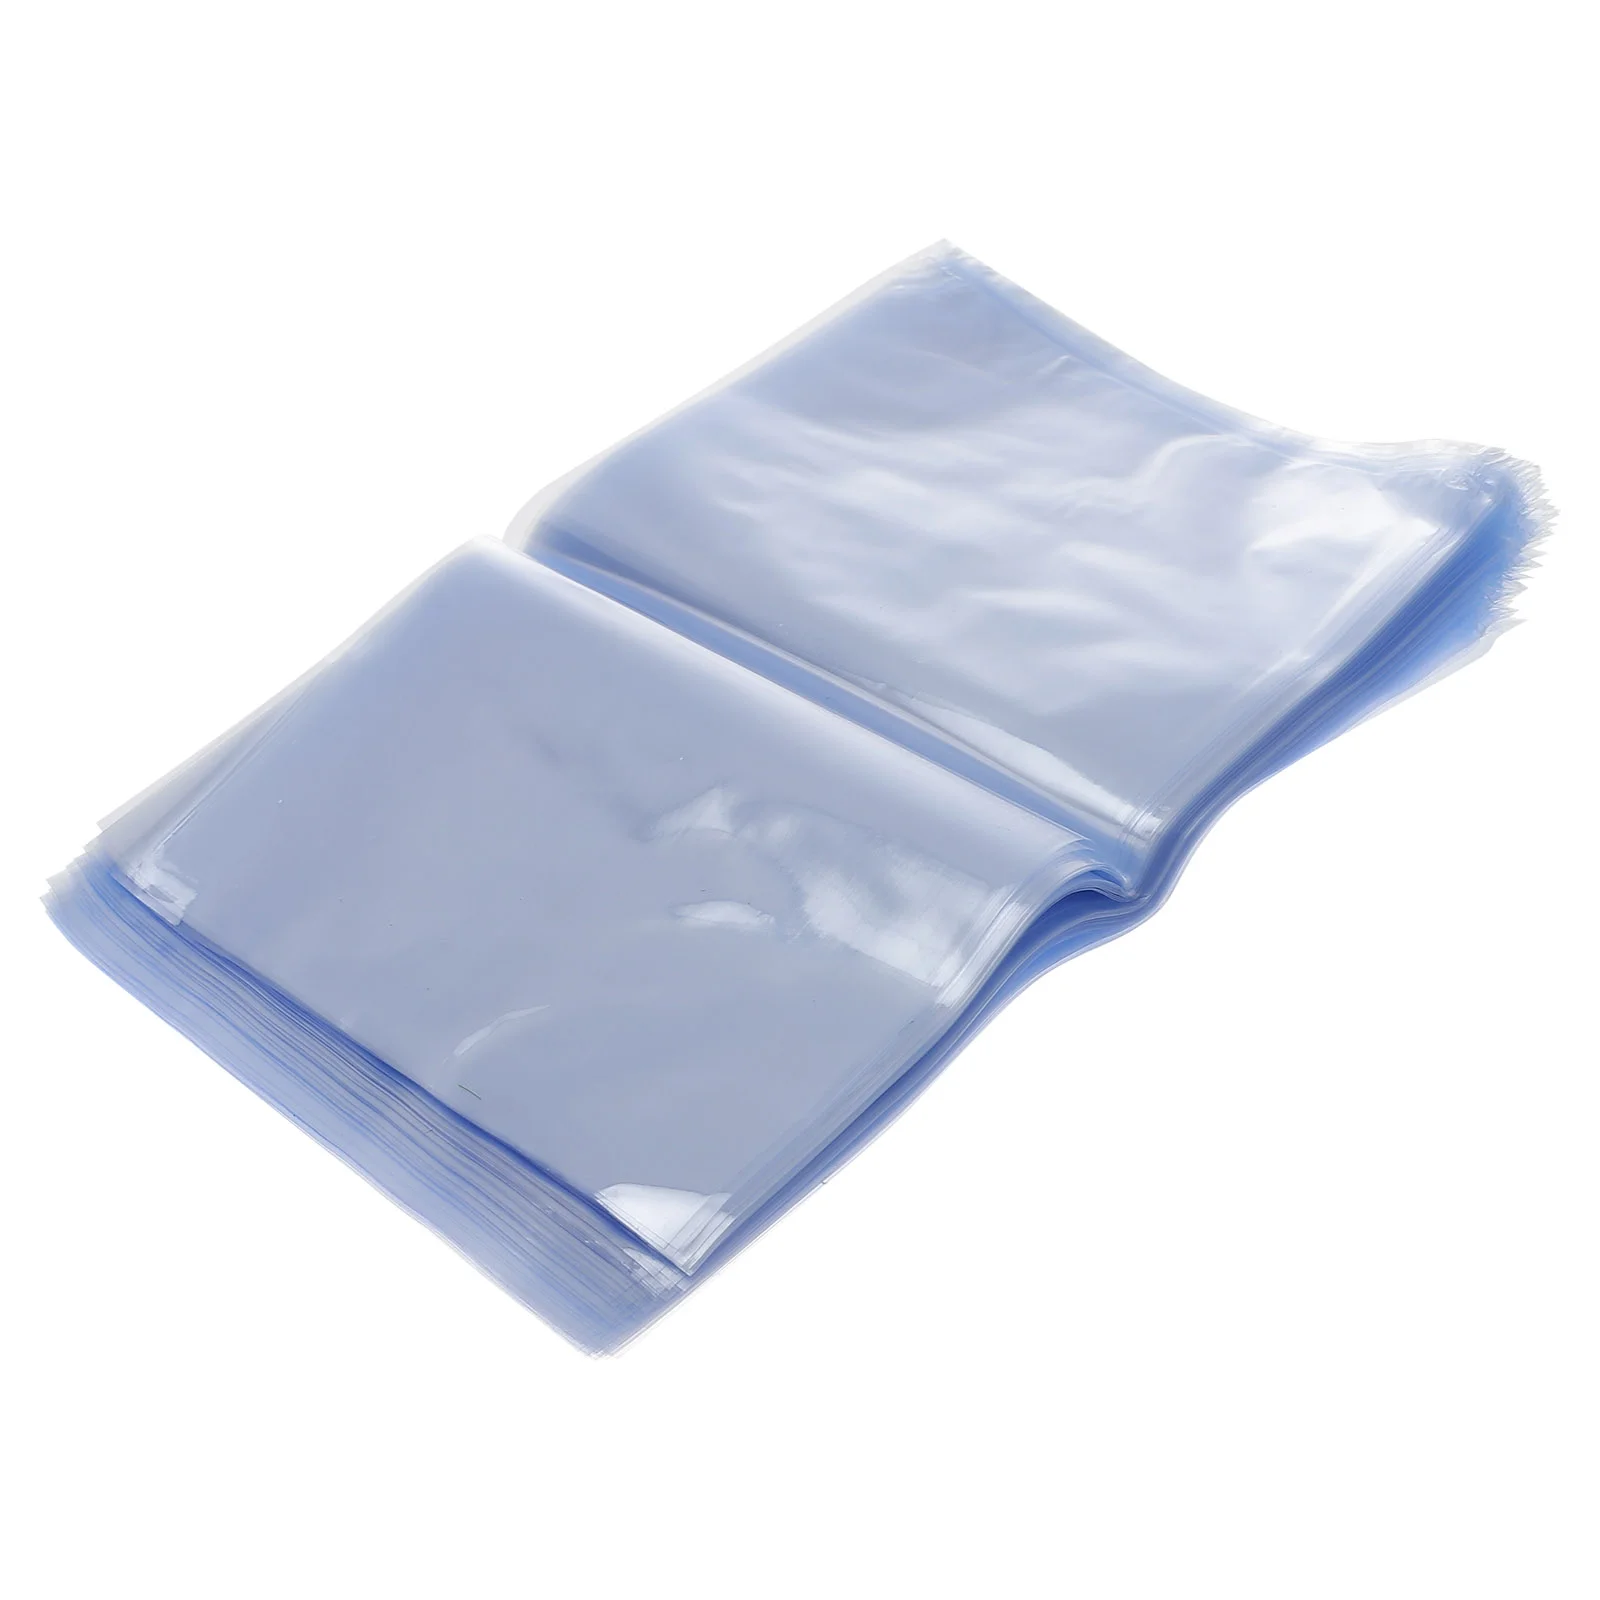 

PVC Shrink Wrap Bags Plastic Film Shrink Wrapping Bags For Soaps Bottles Bath Bombs Packaging Gift Baskets